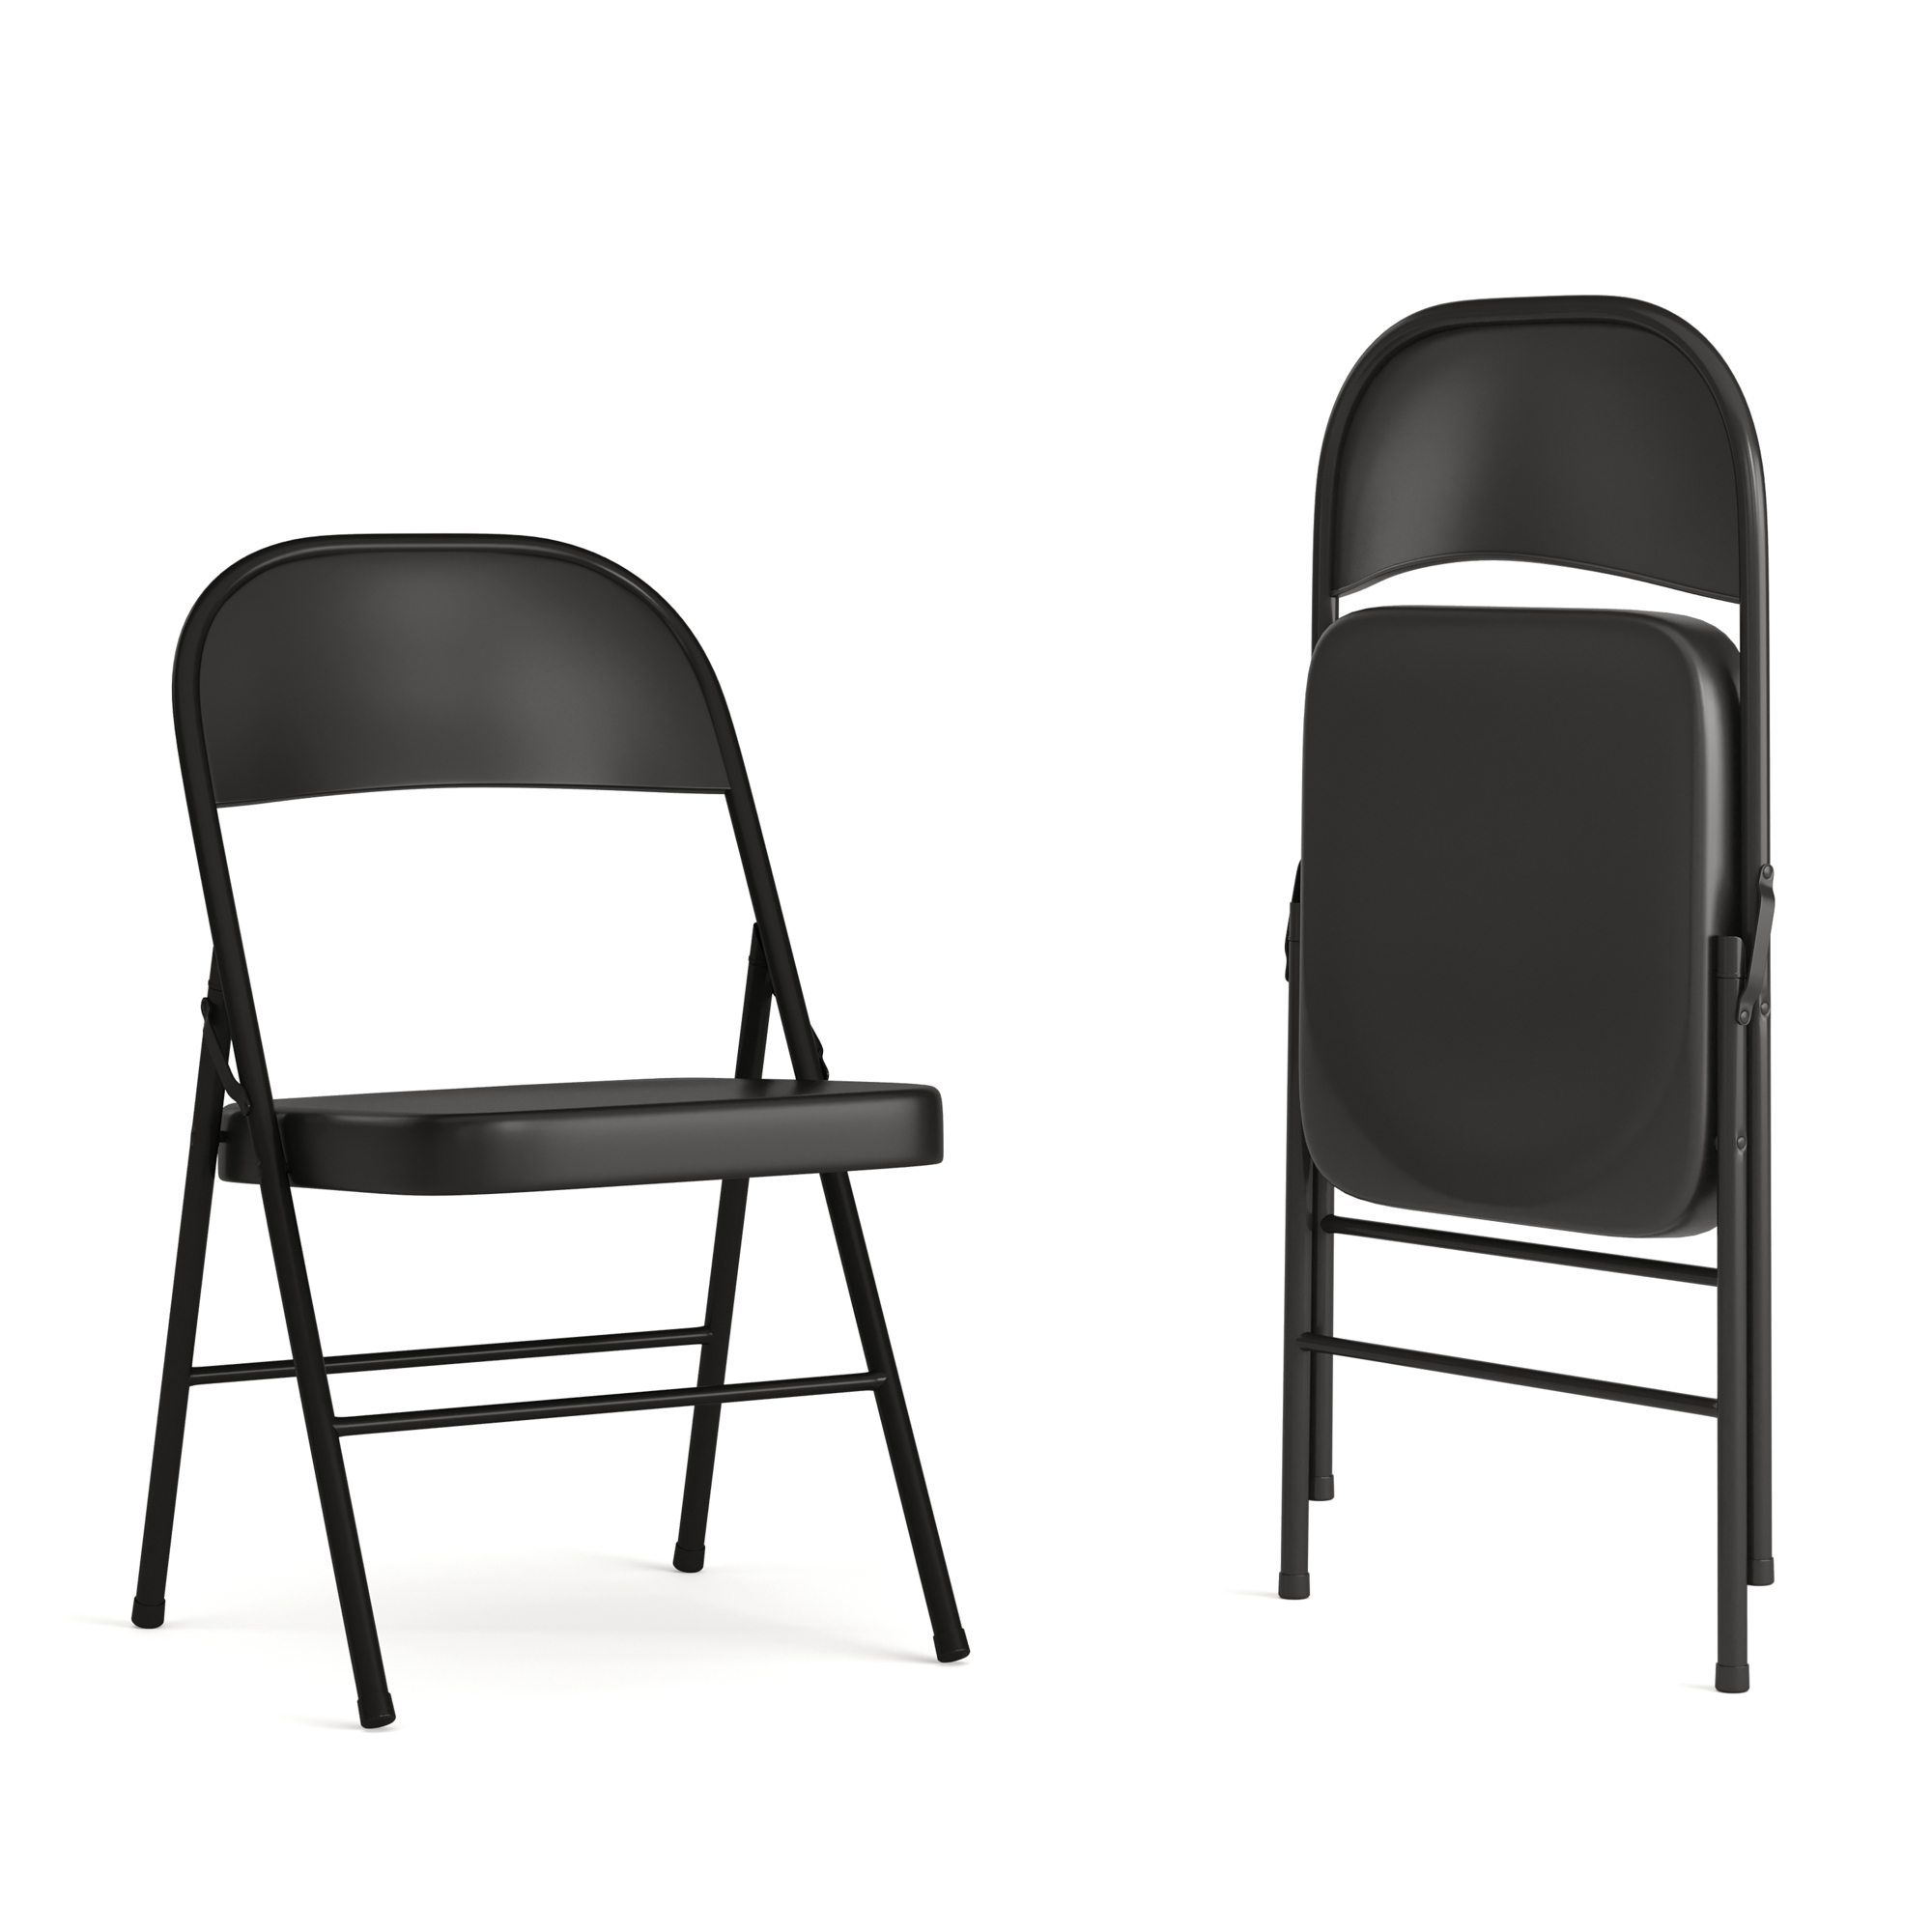 Flash Furniture, 2PK Double Braced Black Metal Folding Event Chair, Primary Color Black, Included (qty.) 2, Model 2BDF002BK